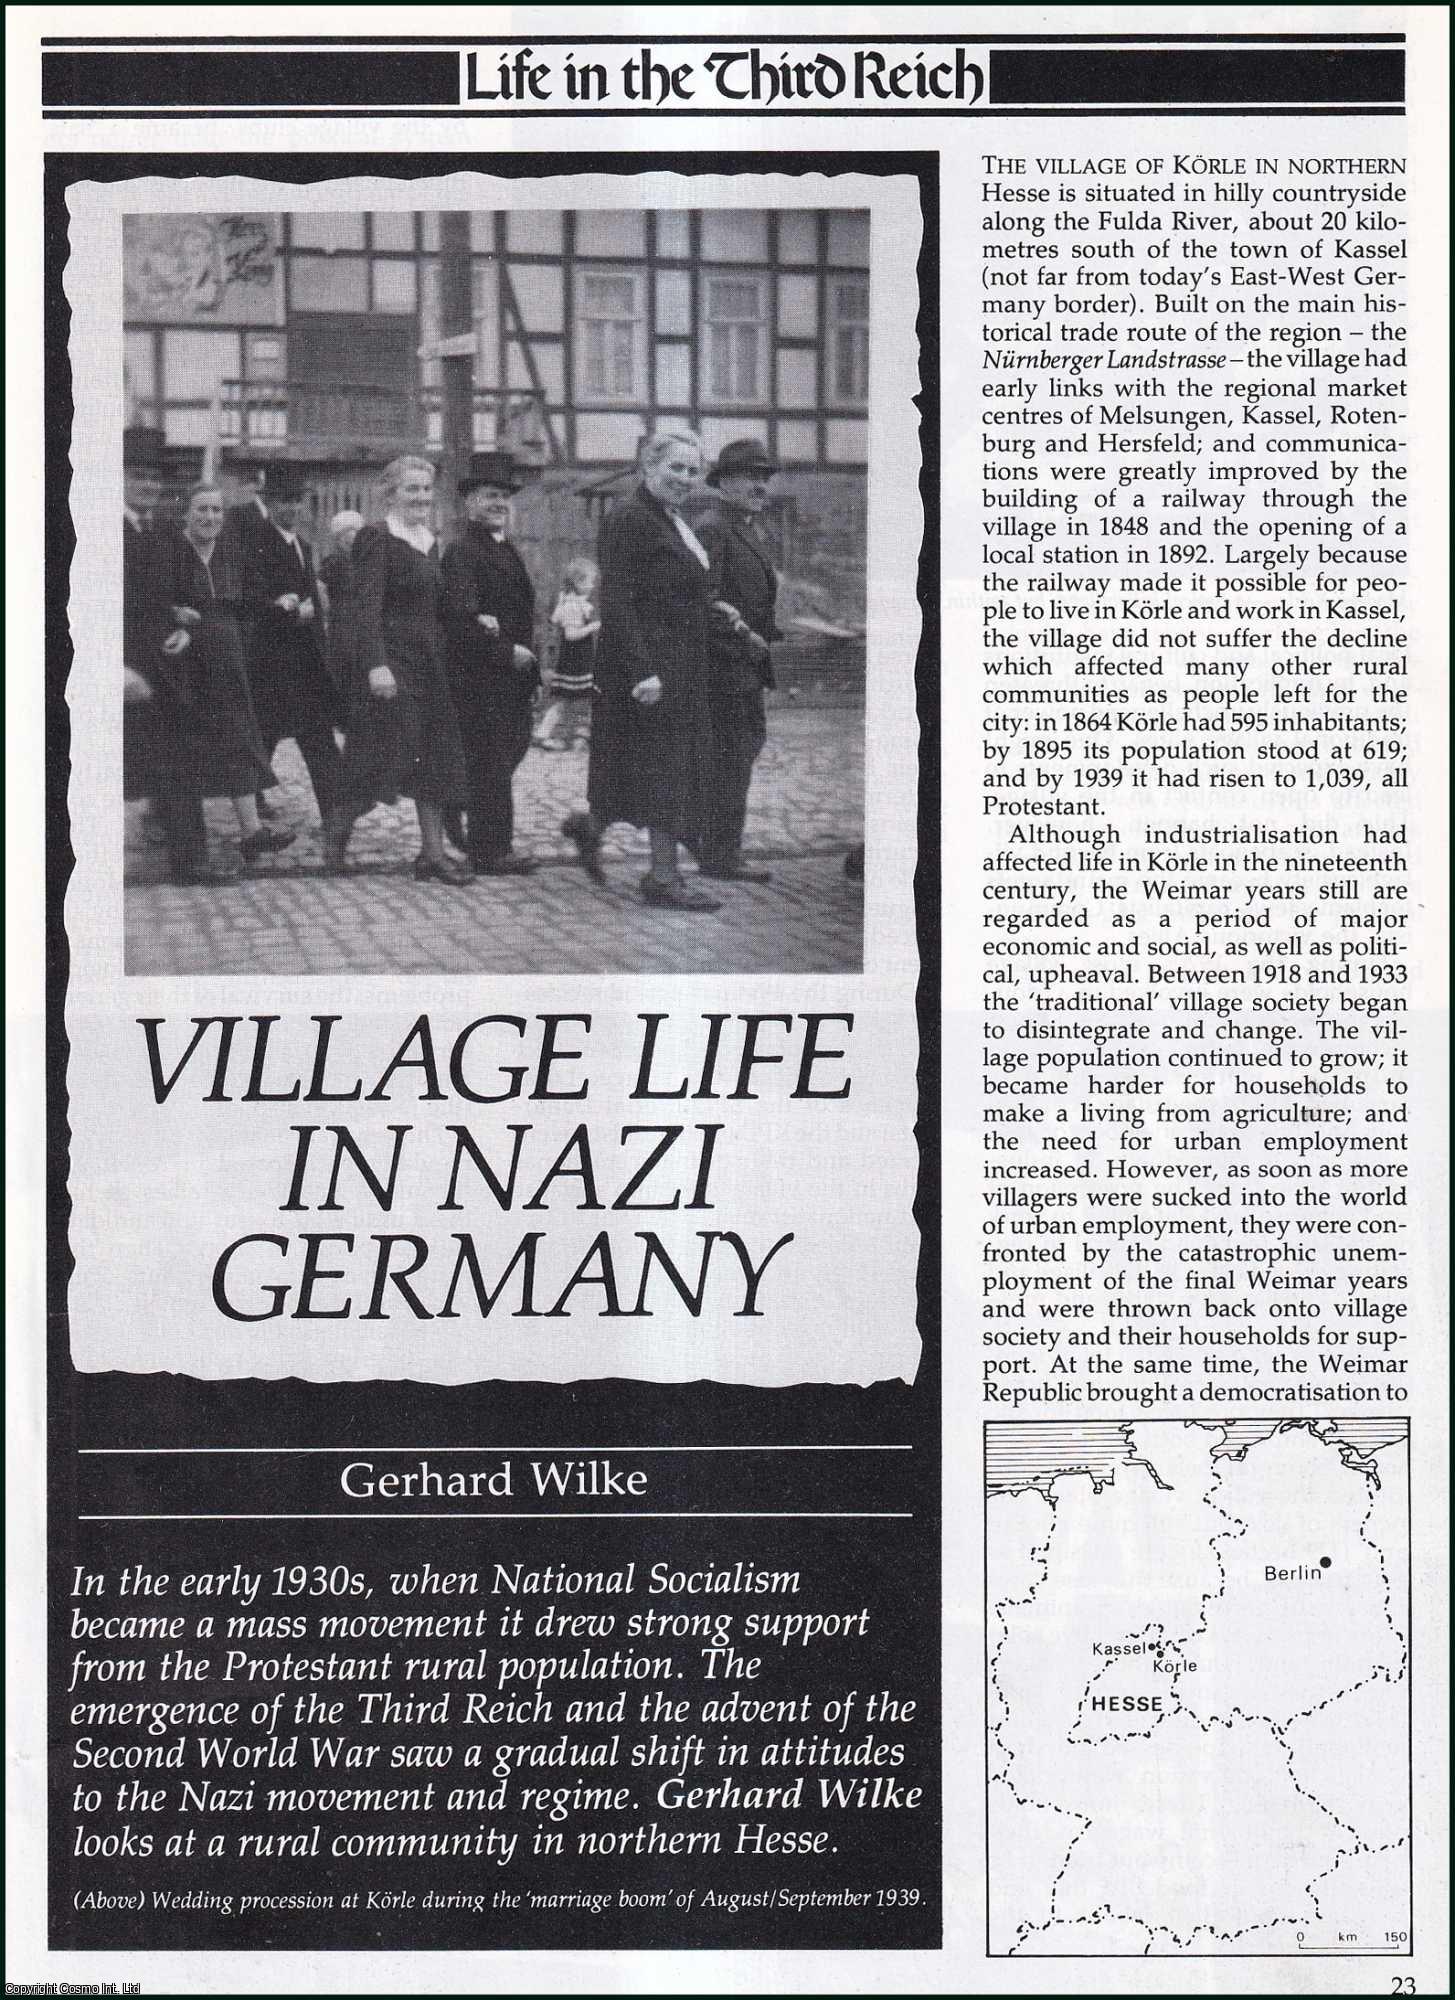 Gerhard Wilke - Village Life in Nazi Germany. An original article from History Today, 1985.